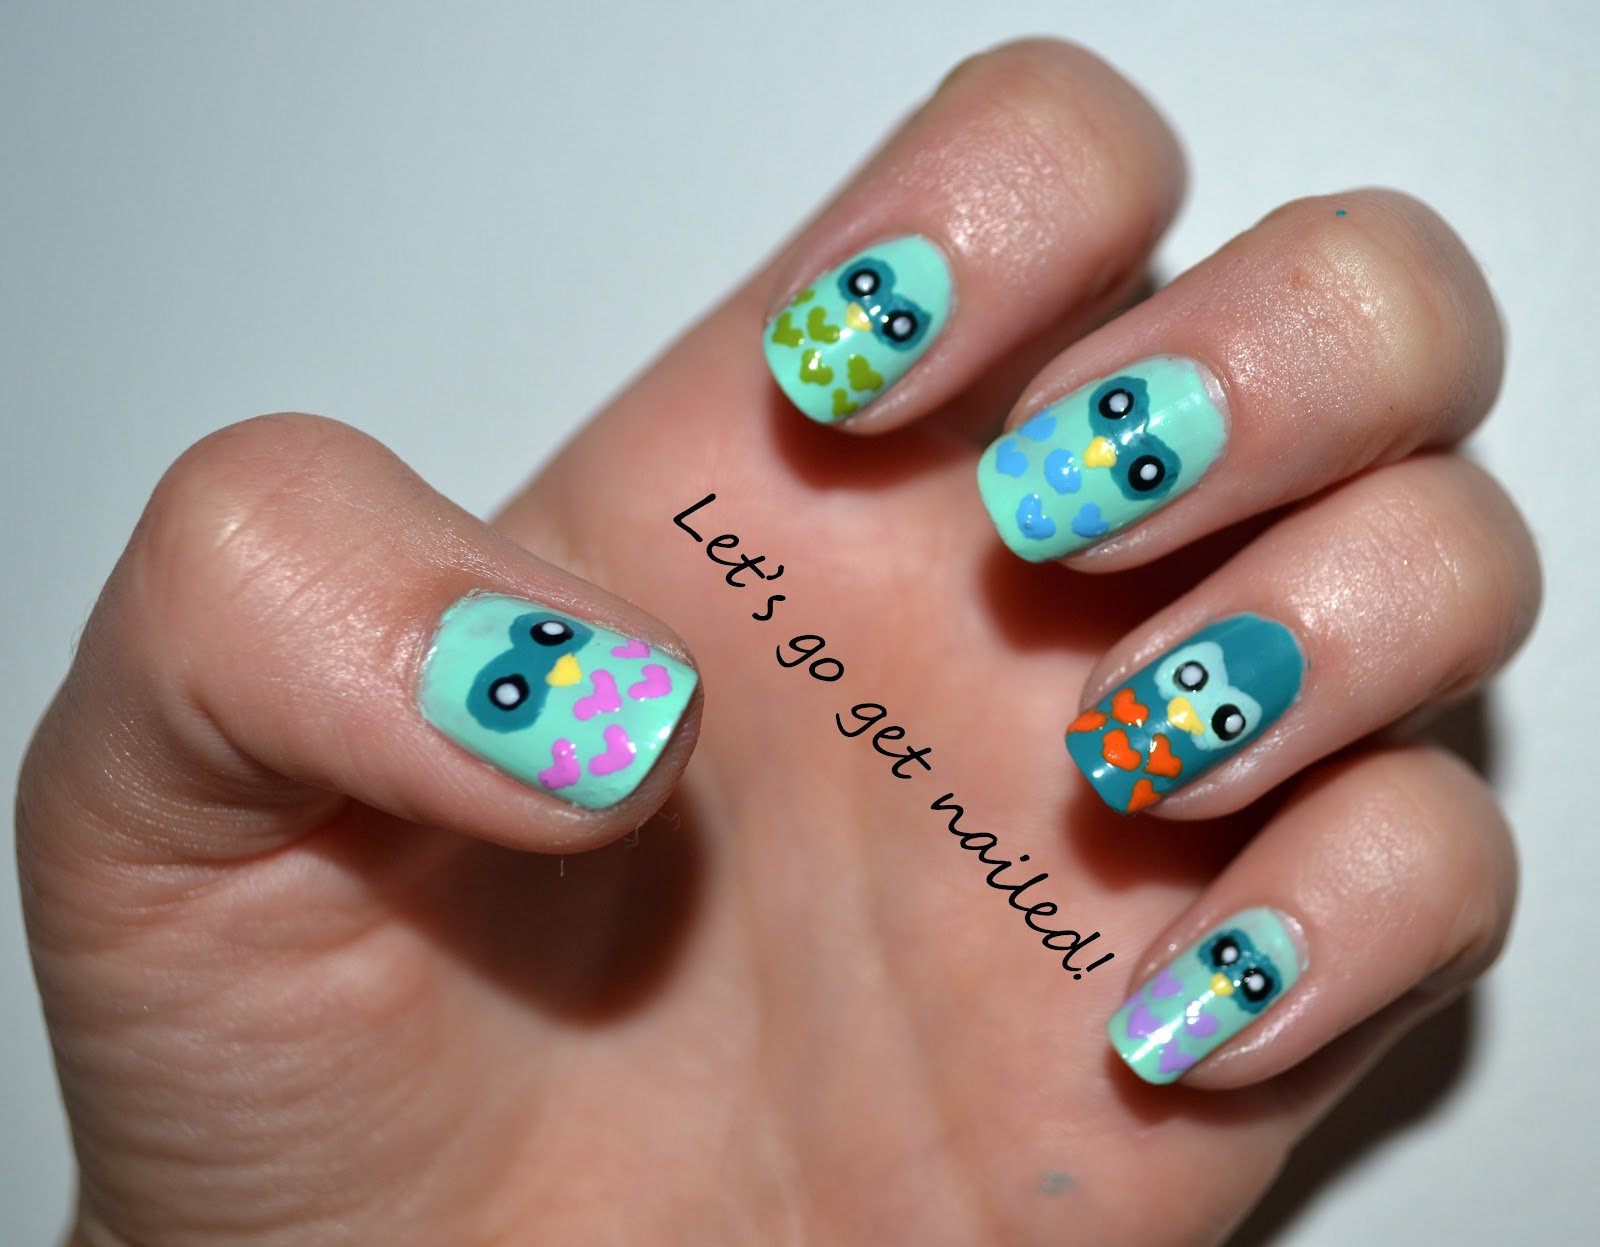 3. Cute and Easy Owl Nails - wide 3